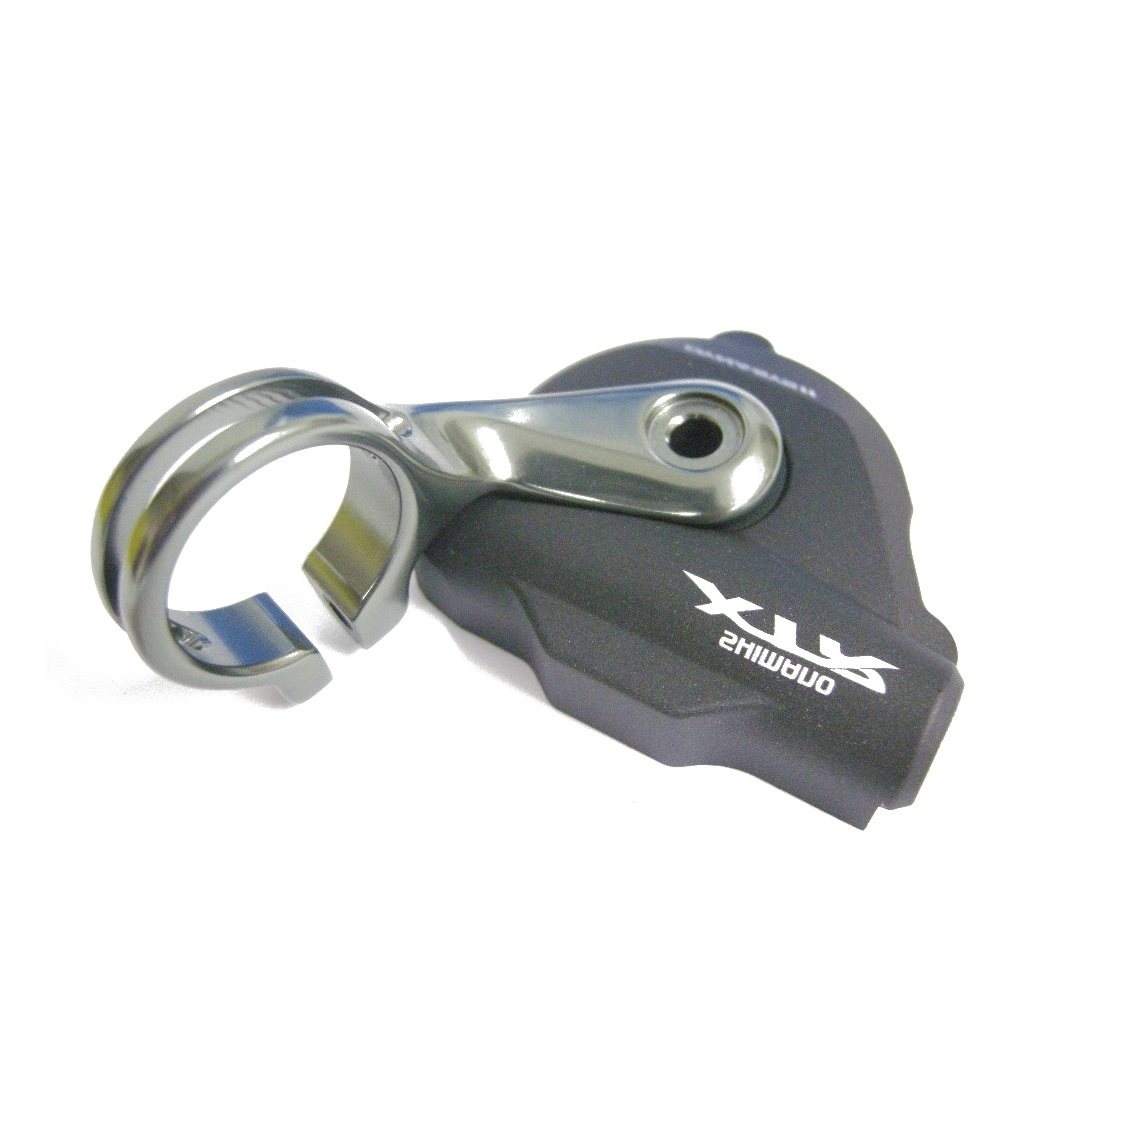 Spare cover for left - hand XTR SL-M9000 shift lever